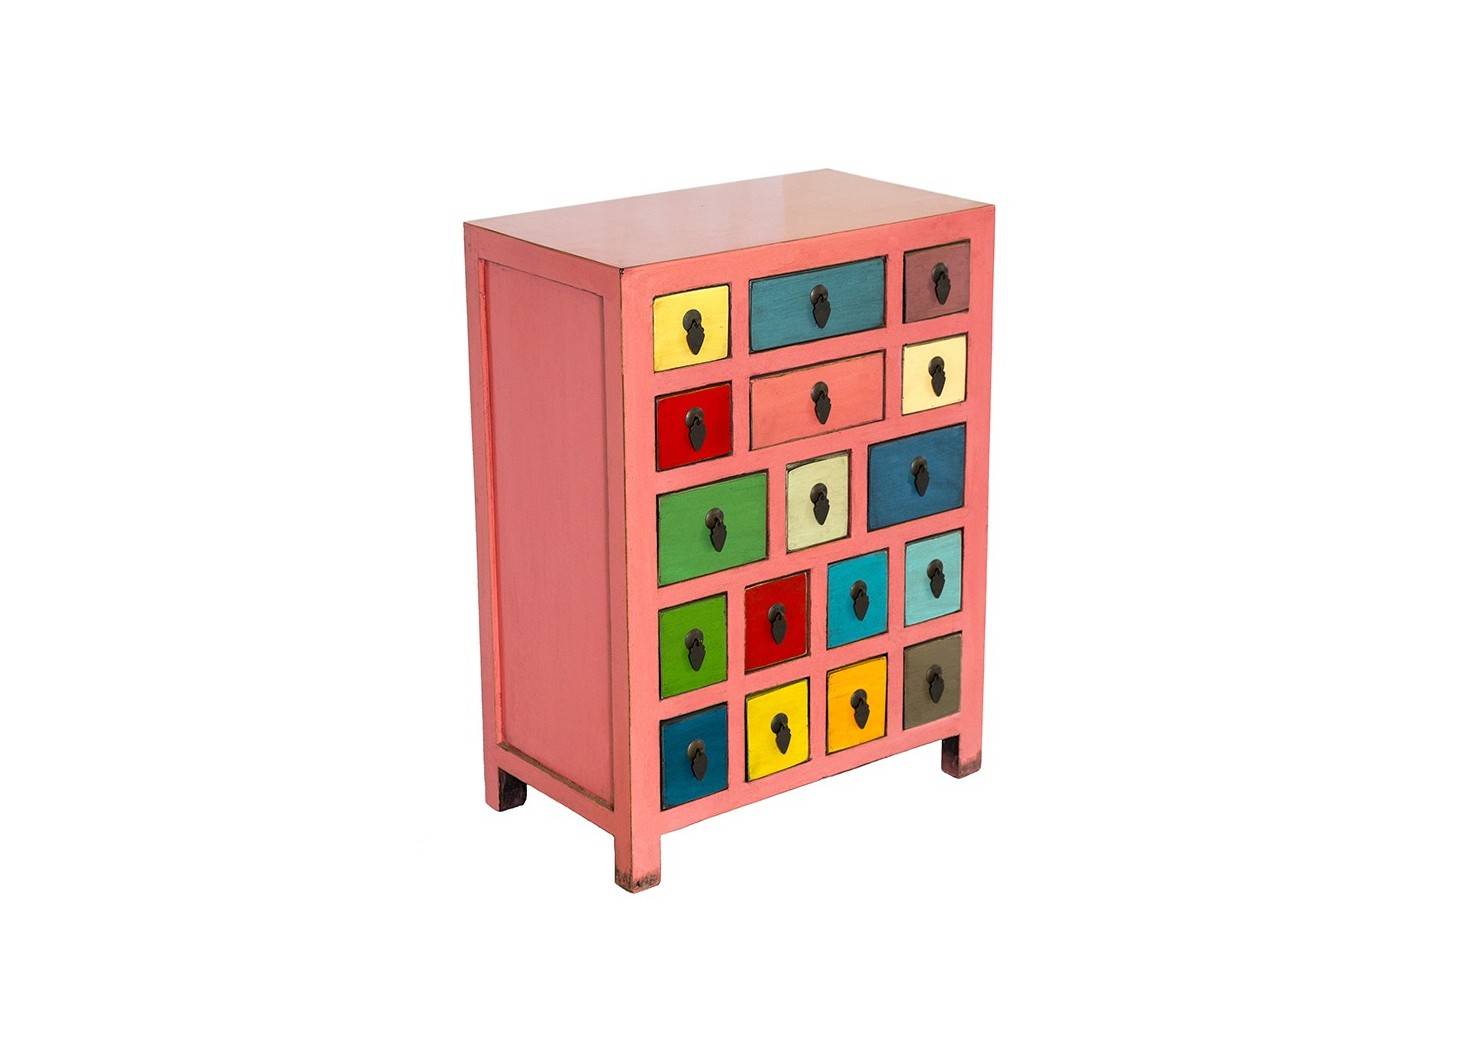 Chinese apothecary cabinet - Multicolore